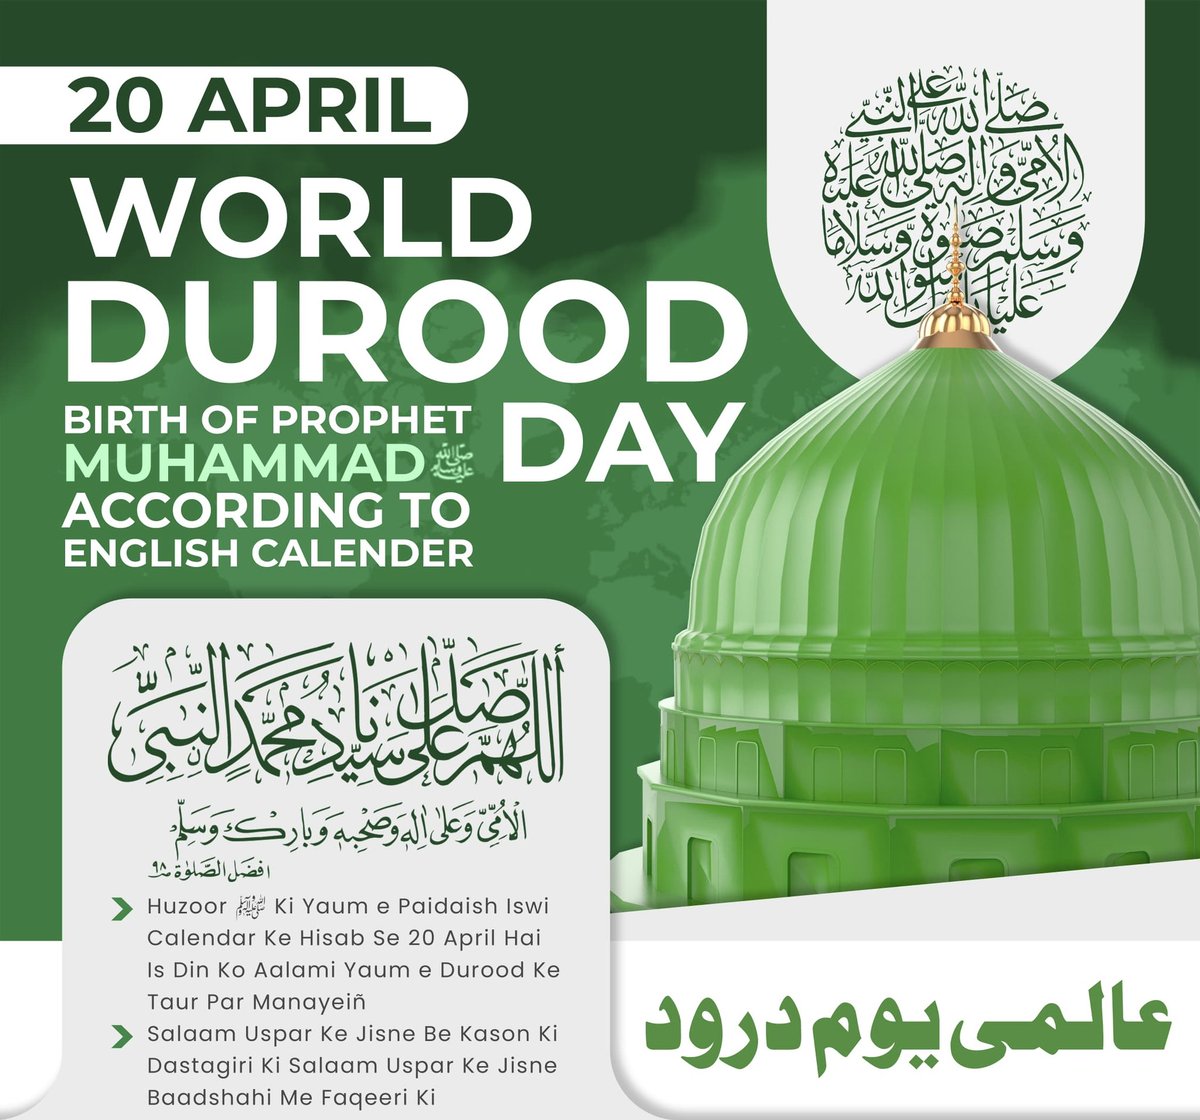 20th April is the birth Aniiversary of the Holy Prophet as per the Solar calendar. Hence we announce it to be observed as #WorldDuroodDay and send millions of salutations to the Holy Prophet ﷺ

#muftisalmanazhari #durood #worldduroodday #prophetmuhammad #ahlesunnah